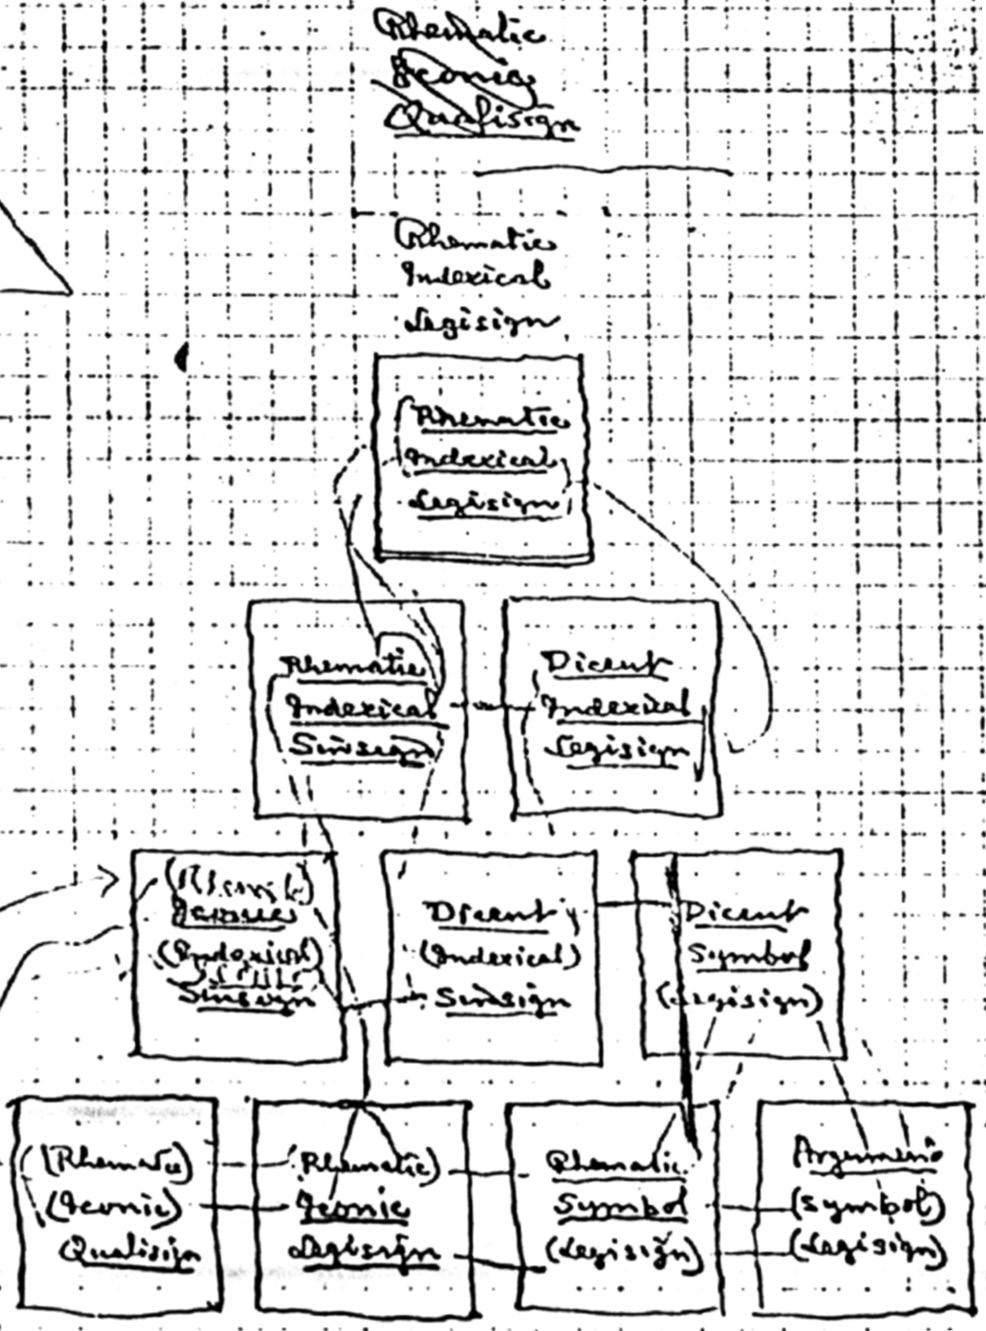 Peirce s models for ten classes of signs 661 Fig. 3: A draft for the Syllabus diagram found in manuscript MS 540: 27. attempt to organize the classes according to their internal composition.